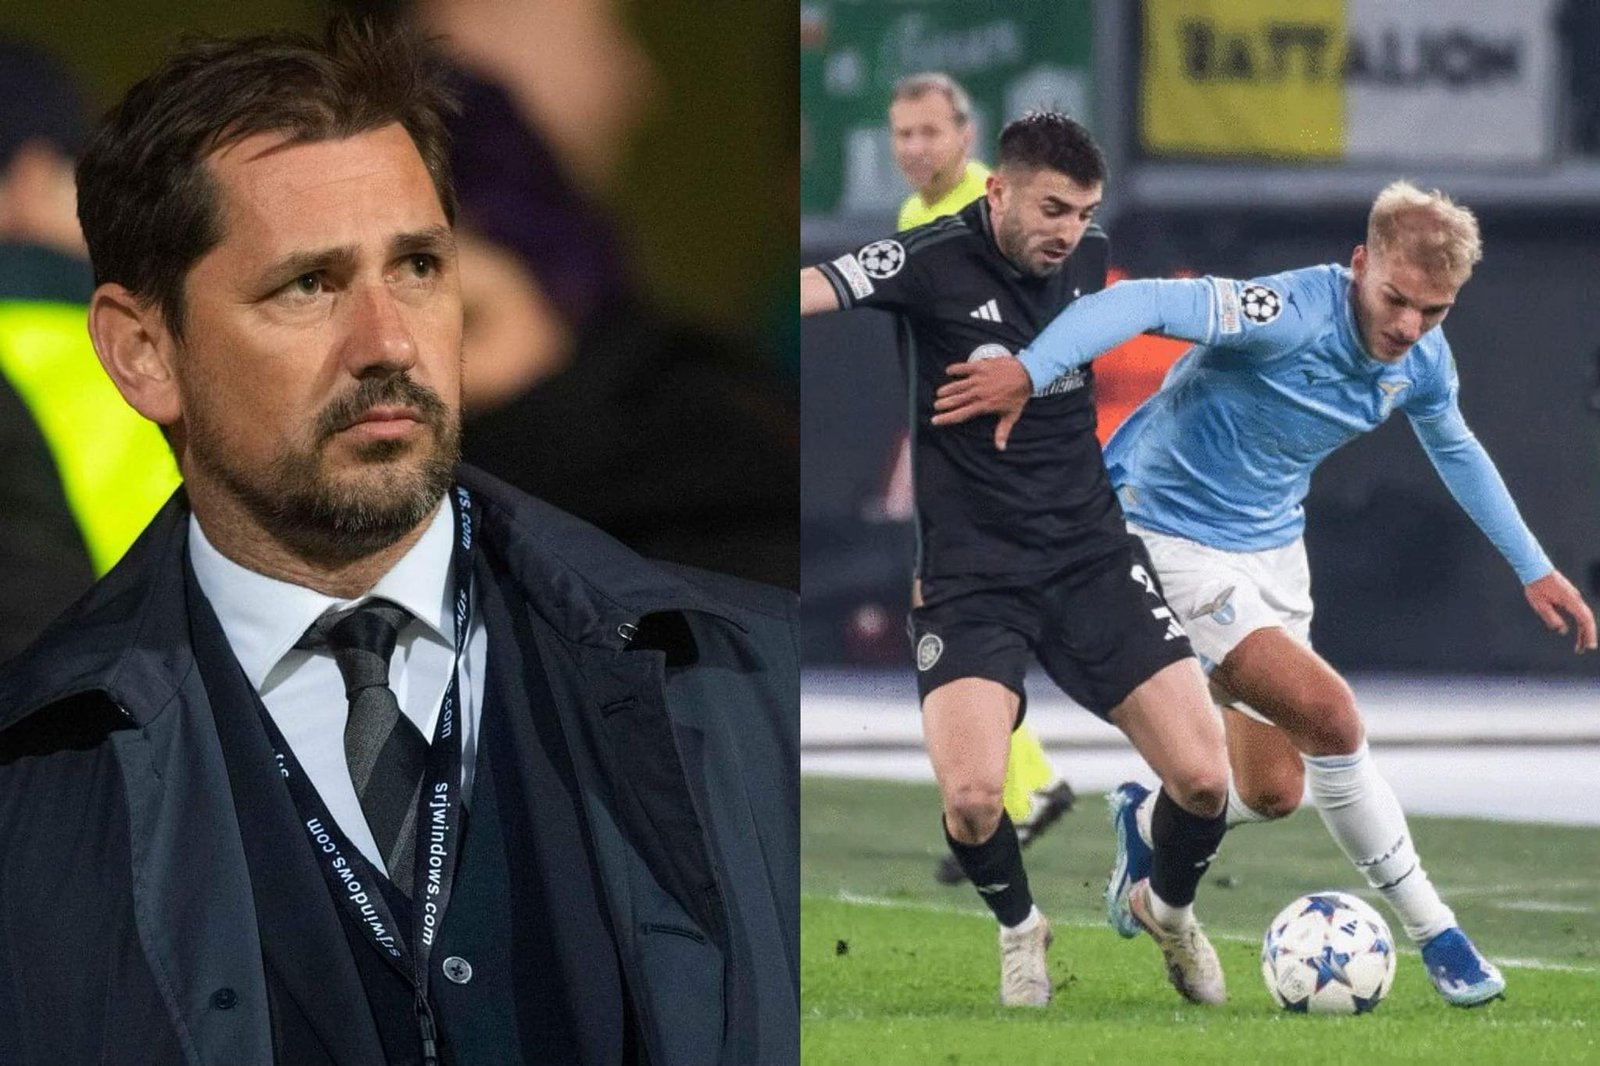 "There’s no backup the left-back area” - 50 years-old celtic legend Jackie McNamara break silence and reveals the two top Celtic players that Lazio aimed at on Tuesday